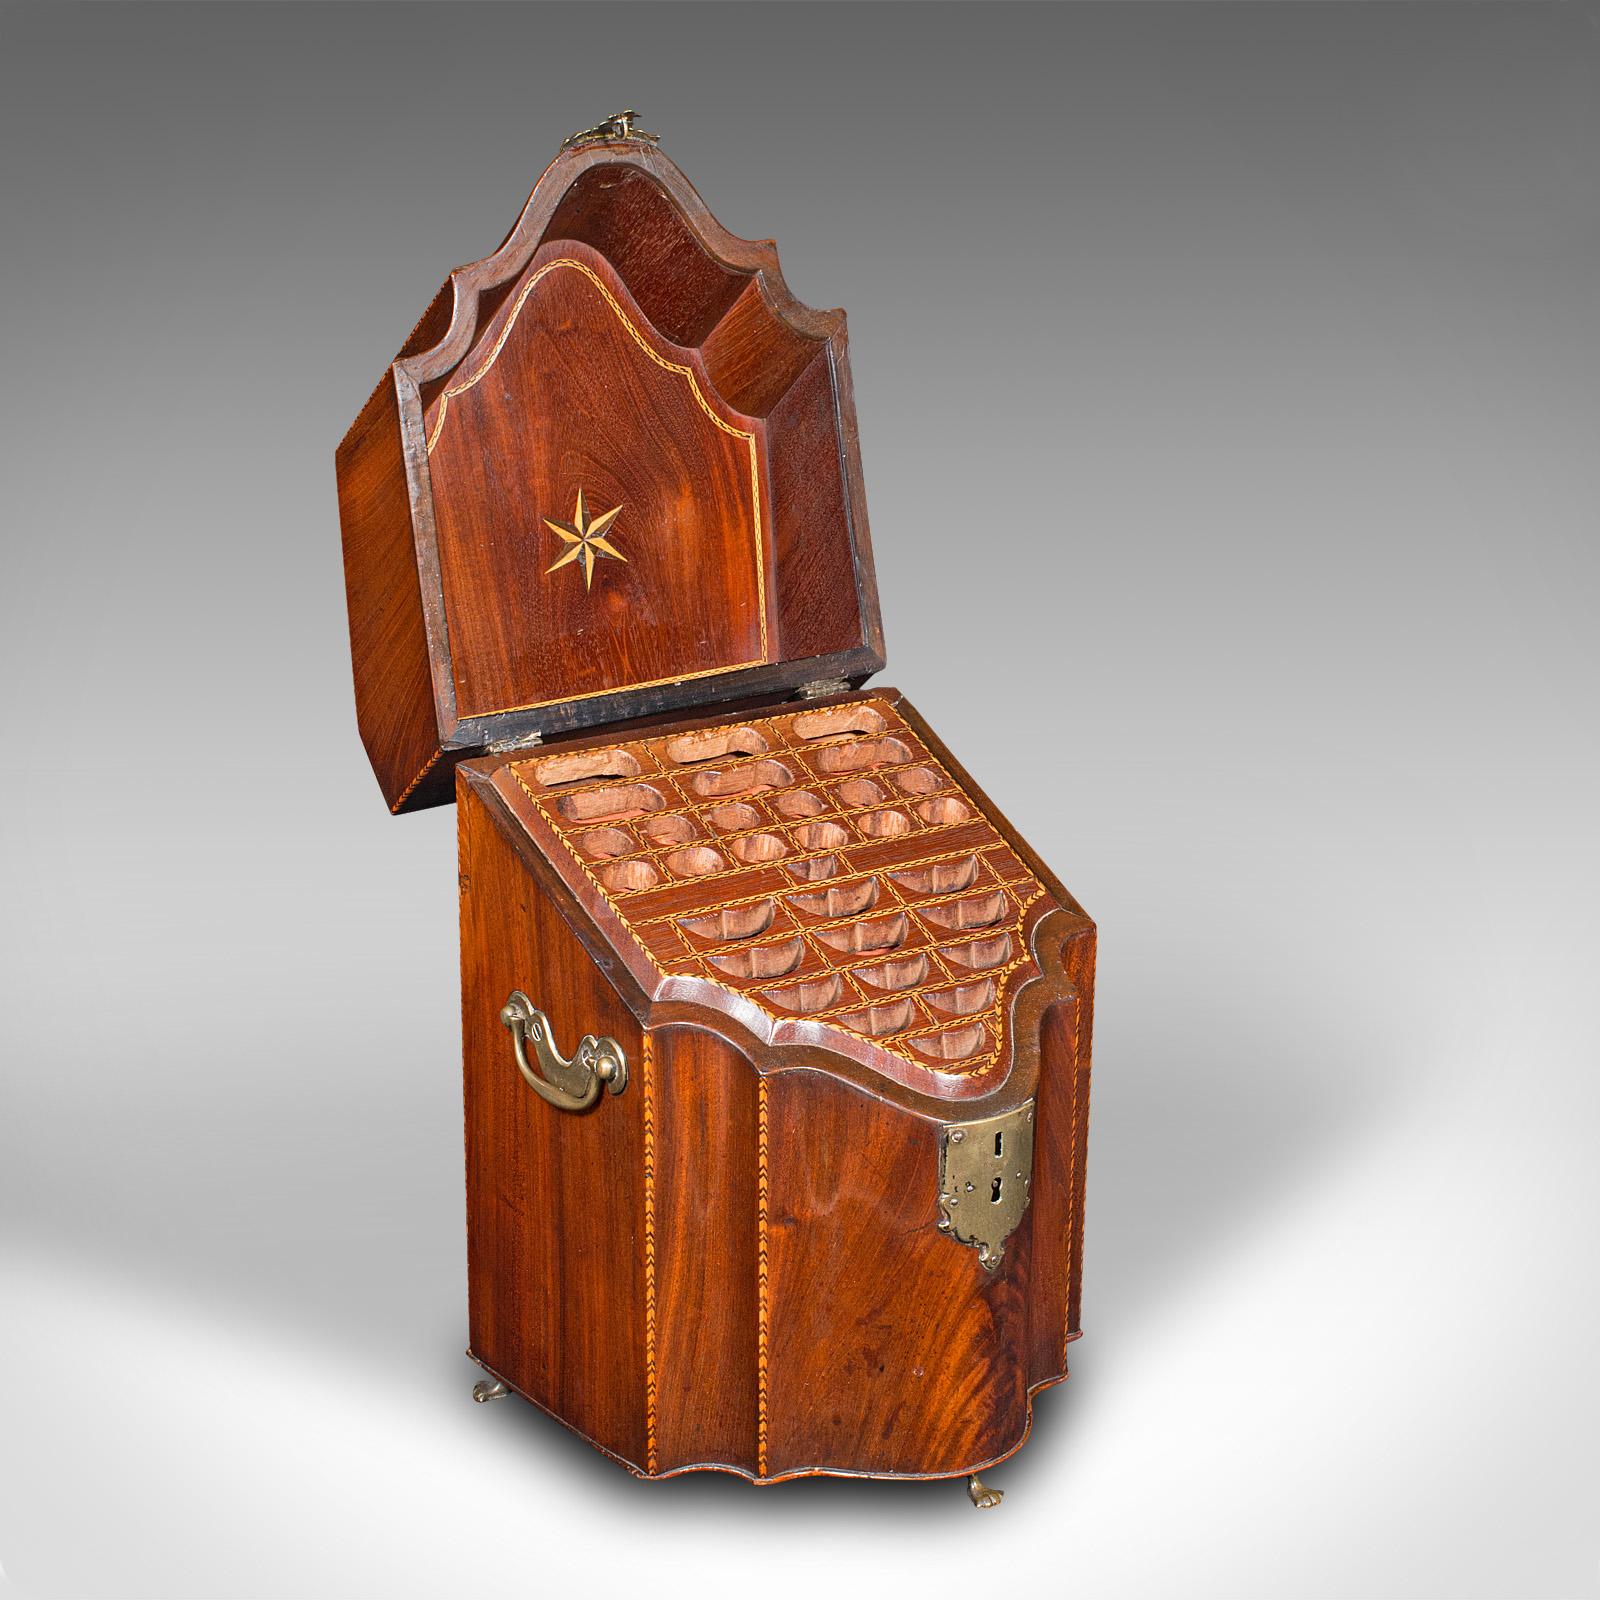 This is an antique knife box. An English, flame mahogany cutlery canteen with oak fitted interior, dating to the Georgian period, circa 1770.

Superb craftsmanship with beautiful figuring and useful proportion
Displays a desirable aged patina and